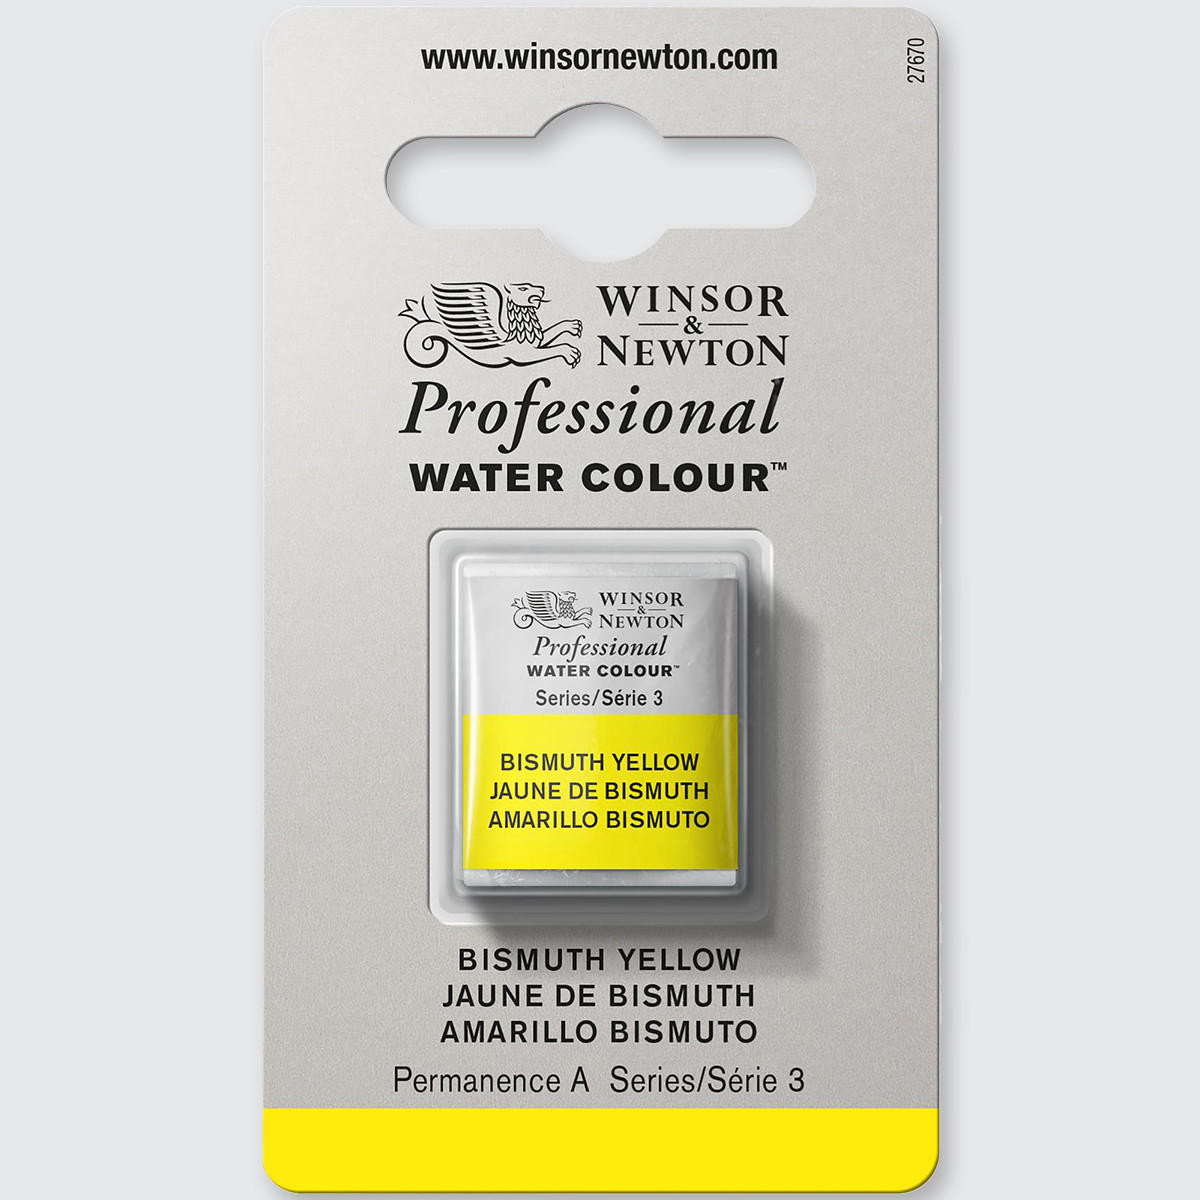 Winsor & Newton Professional Water Colour Half Pan Bismuth Yellow